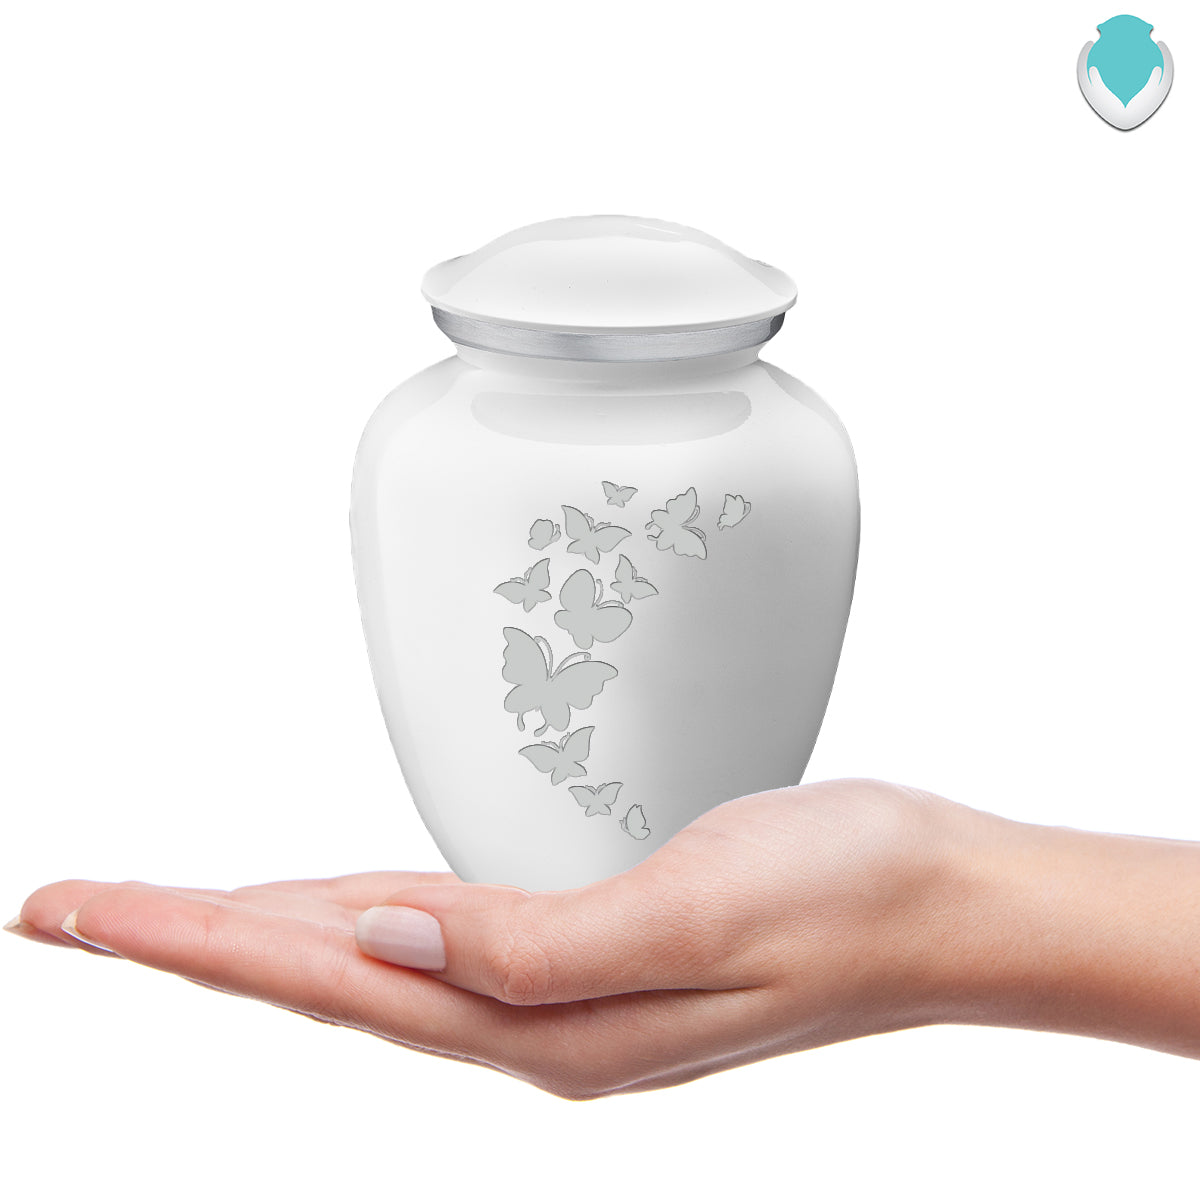 Medium Embrace White Butterfly Cremation Urn